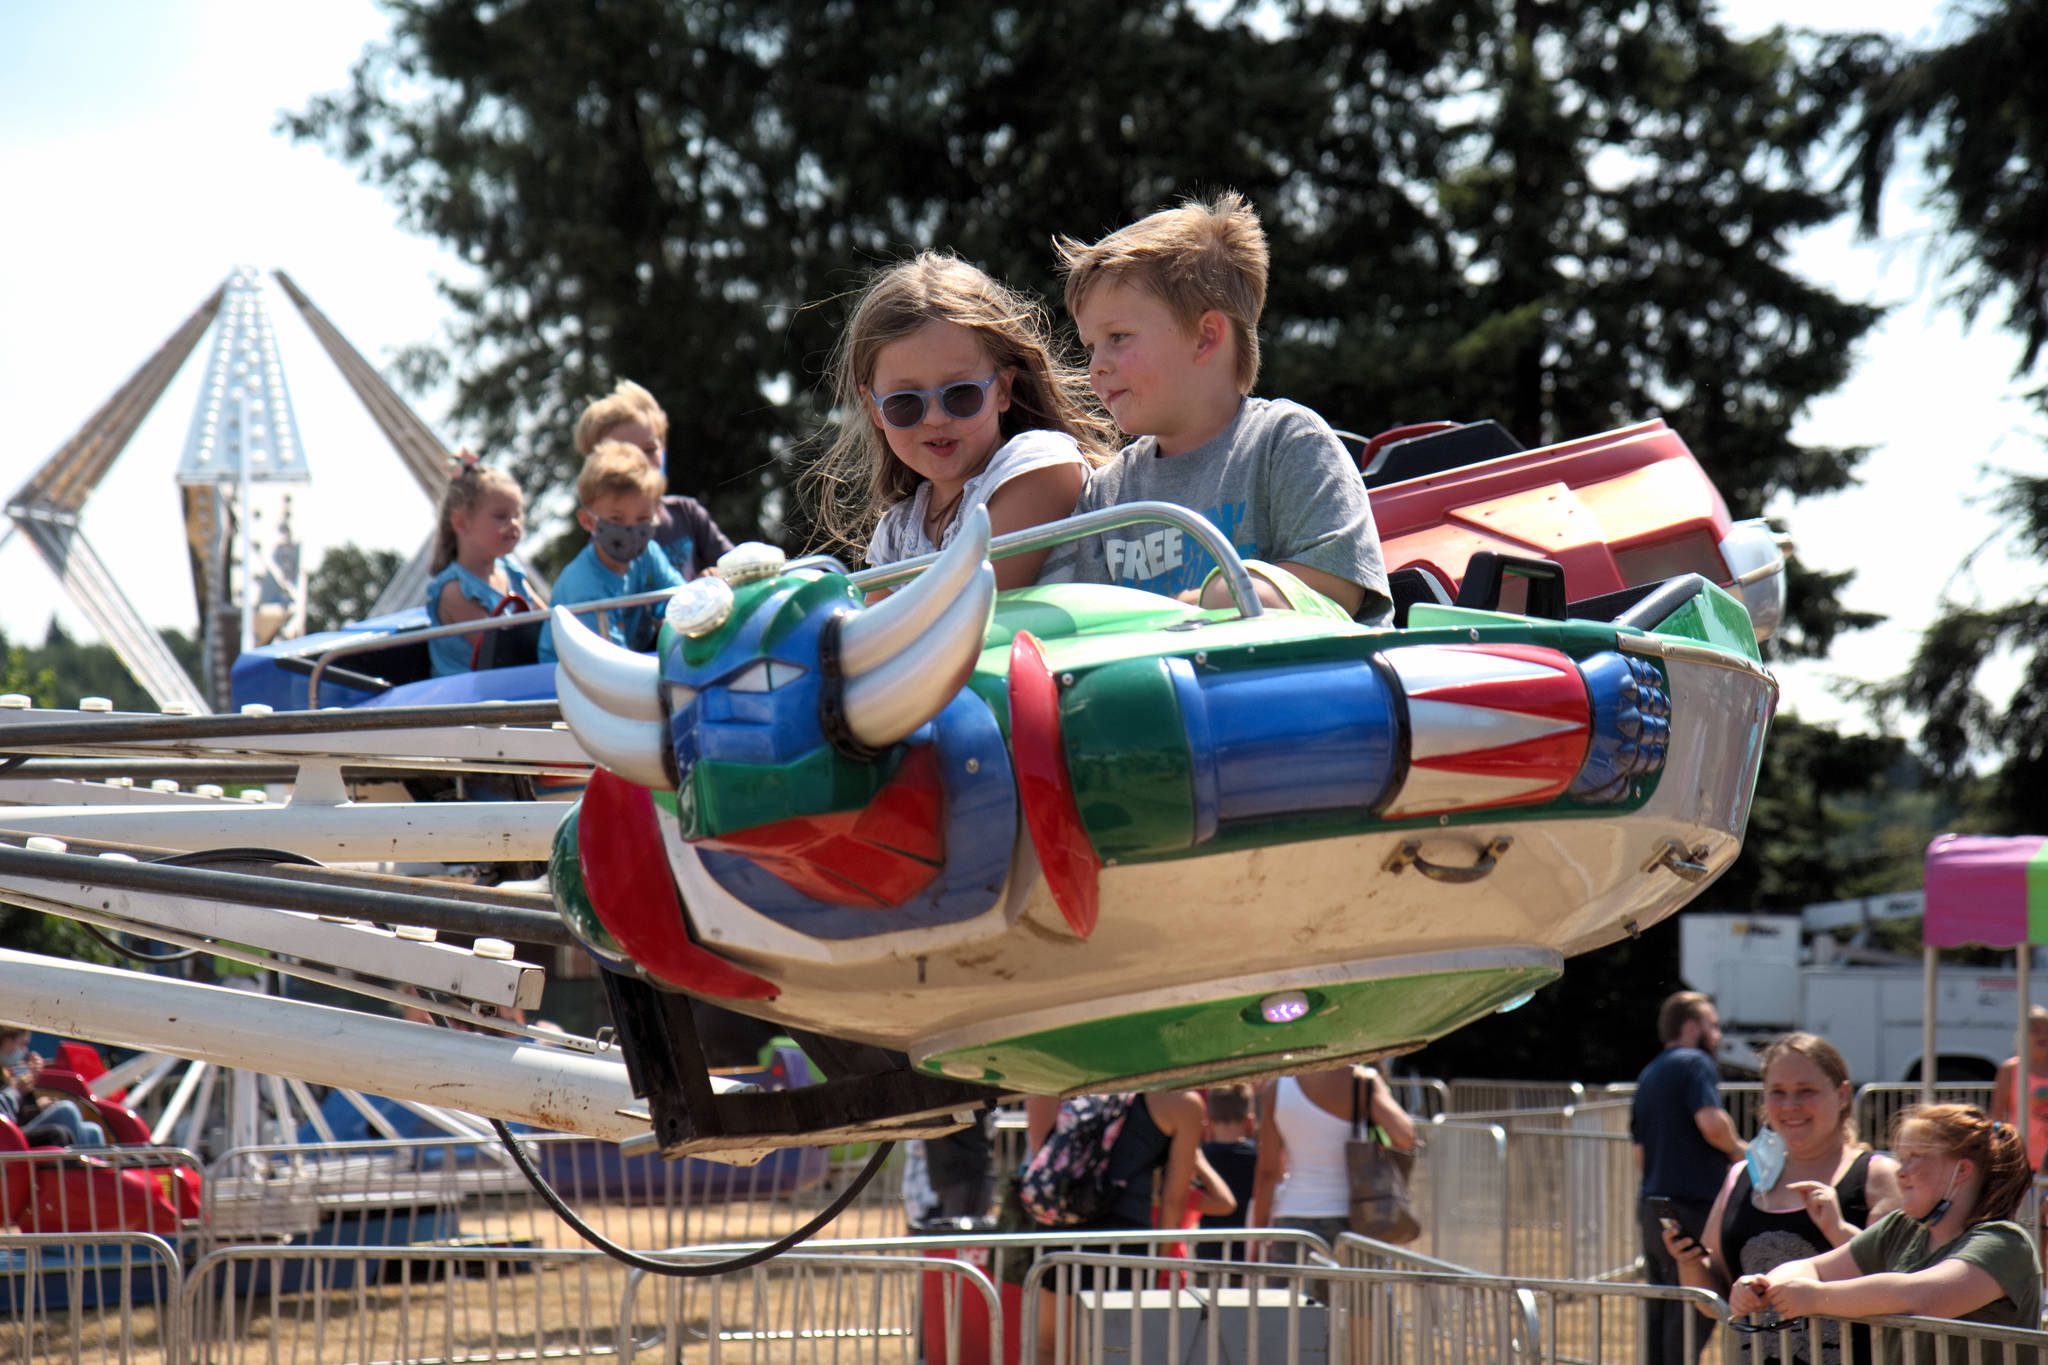 RYAN SPARKS | THE DAILY WORLD A pair of children enjoy a ride during the Grays Harbor County Fair on Thursday in Elma.